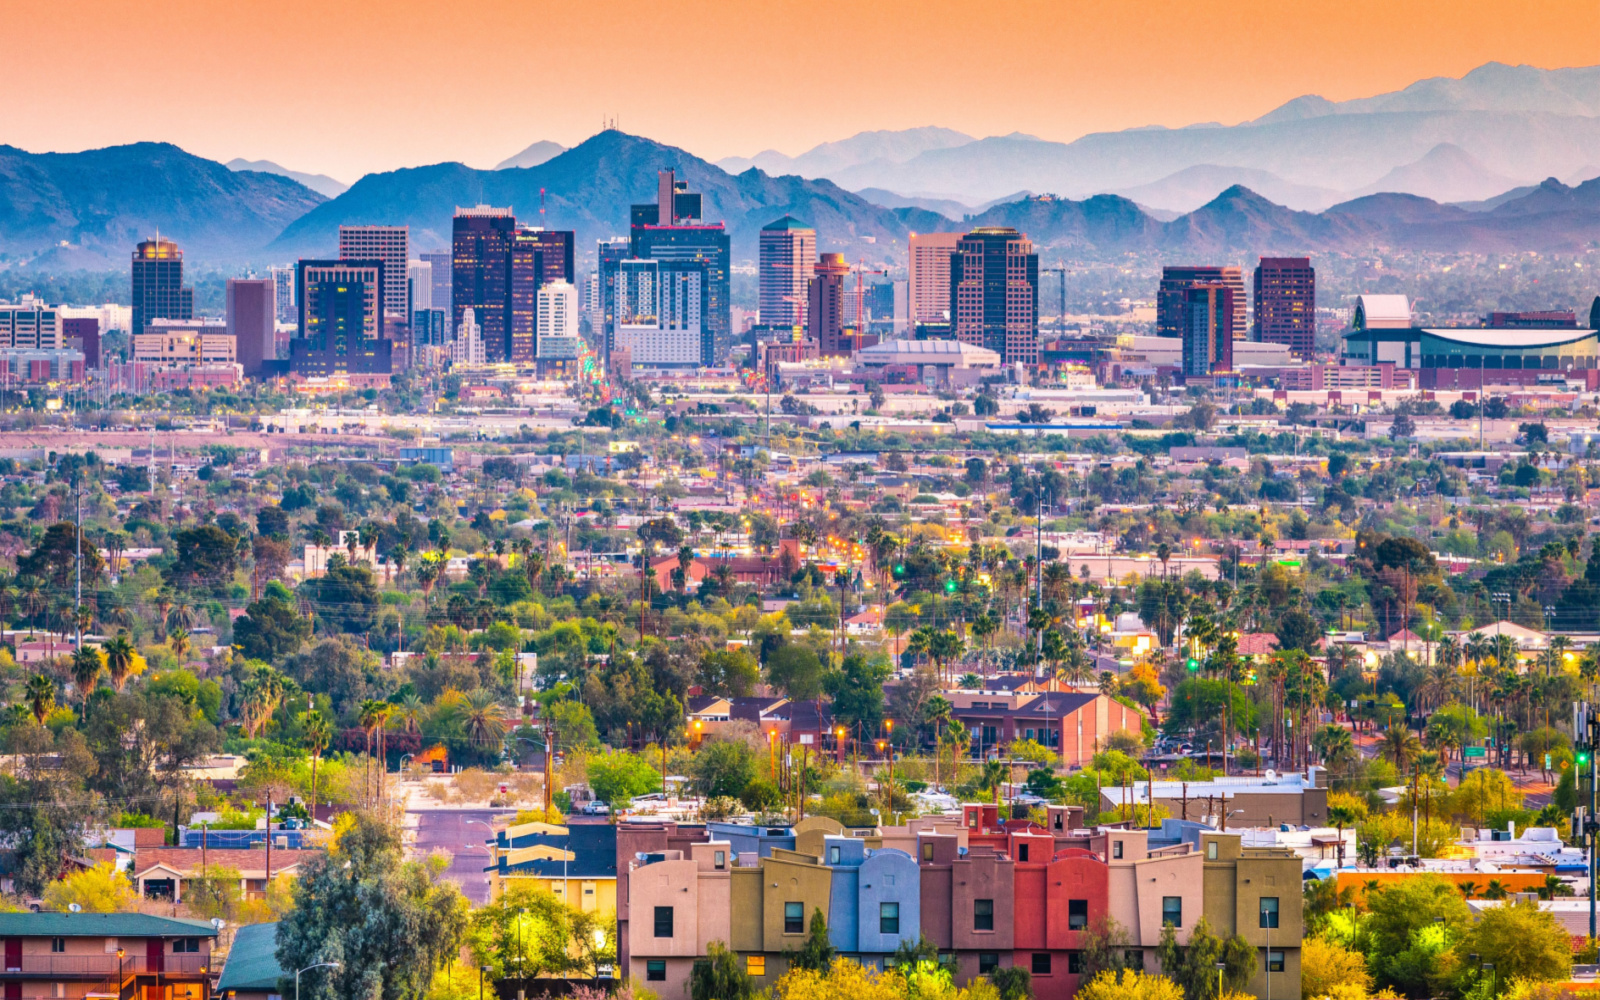 The 15 Best Airbnbs in Arizona in 2023